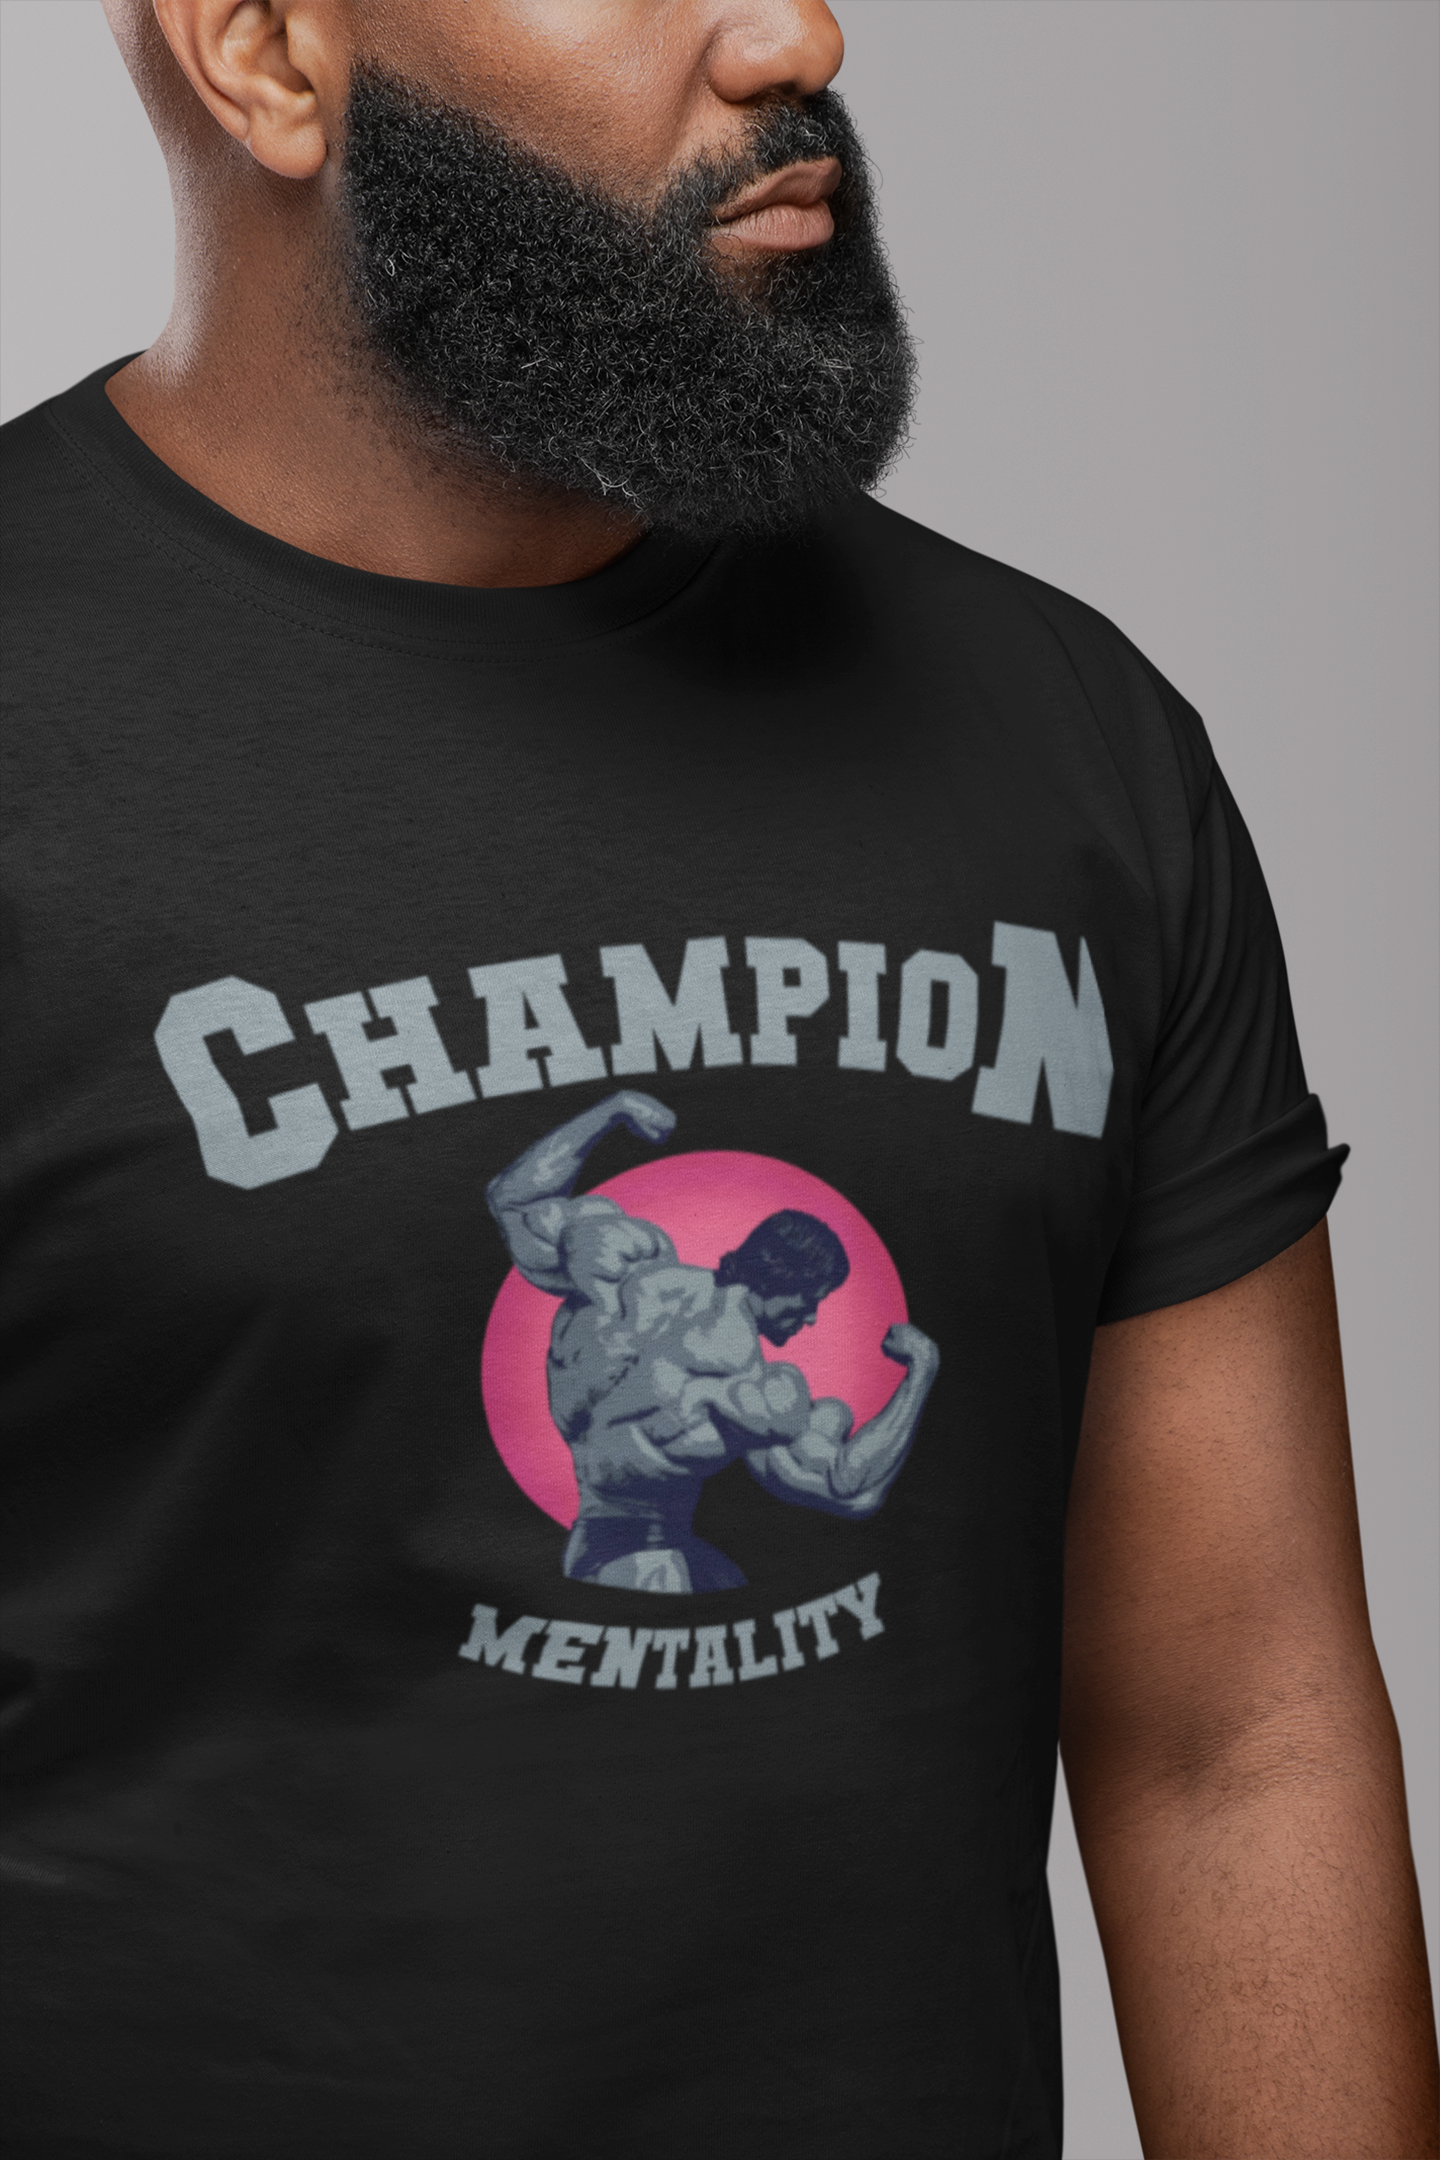 Champion Mentality - Gym Oversized T Shirt Strong Soul Shirts & Tops